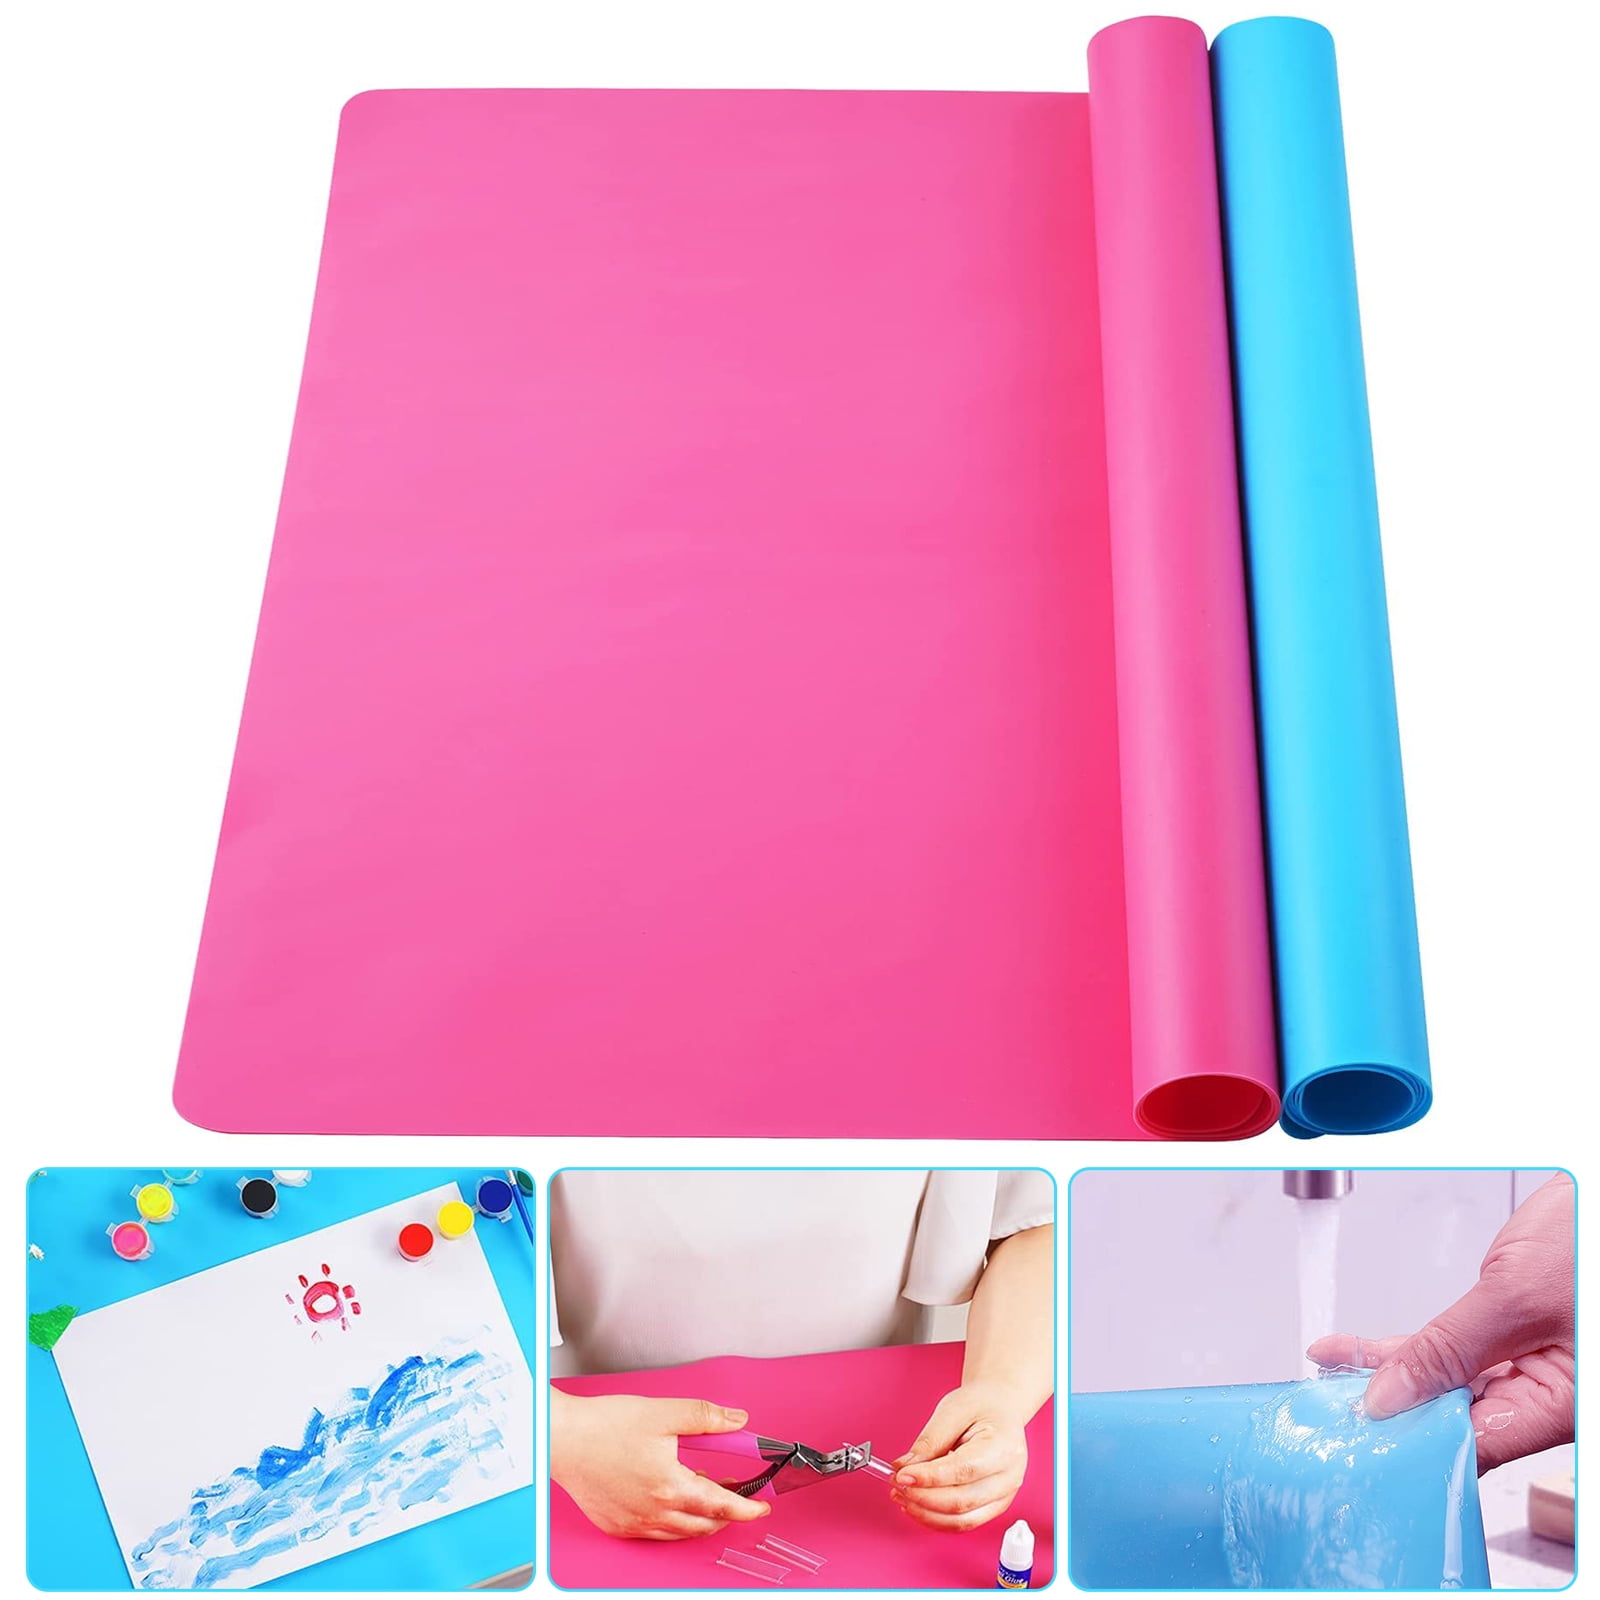 Gartful Extra Large Silicone Mat for Craft, 25.2 x 17.7 Silicone Craft  Sheet Jewelry Casting Mold, Countertop Mat, Nonskid Counter Table  Protector